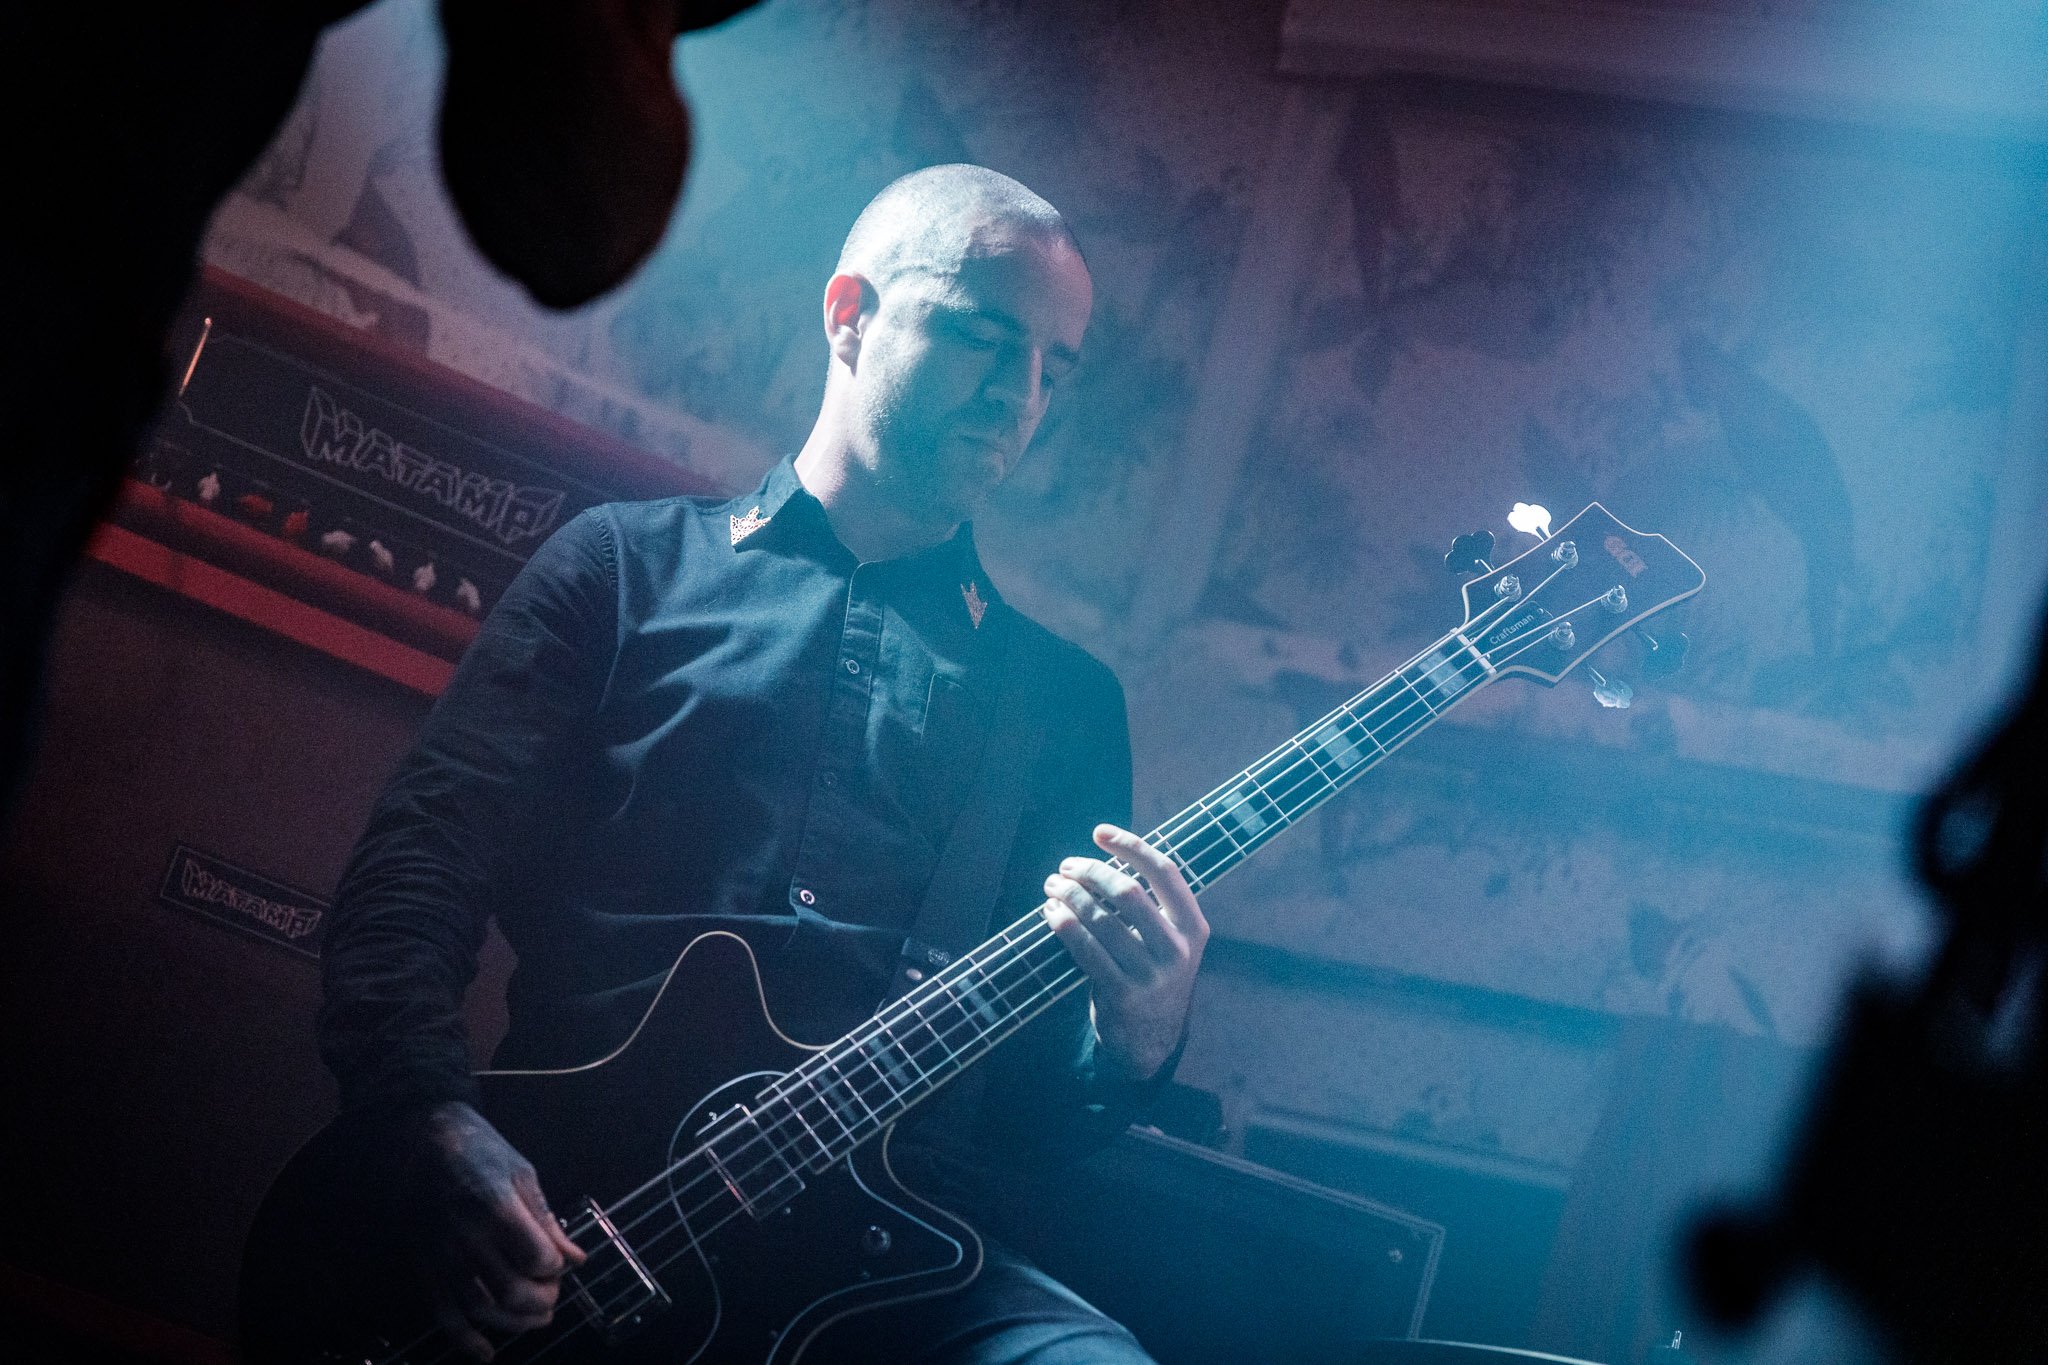 Bossk at The Deaf Institute in Manchester on December 17th 2021 